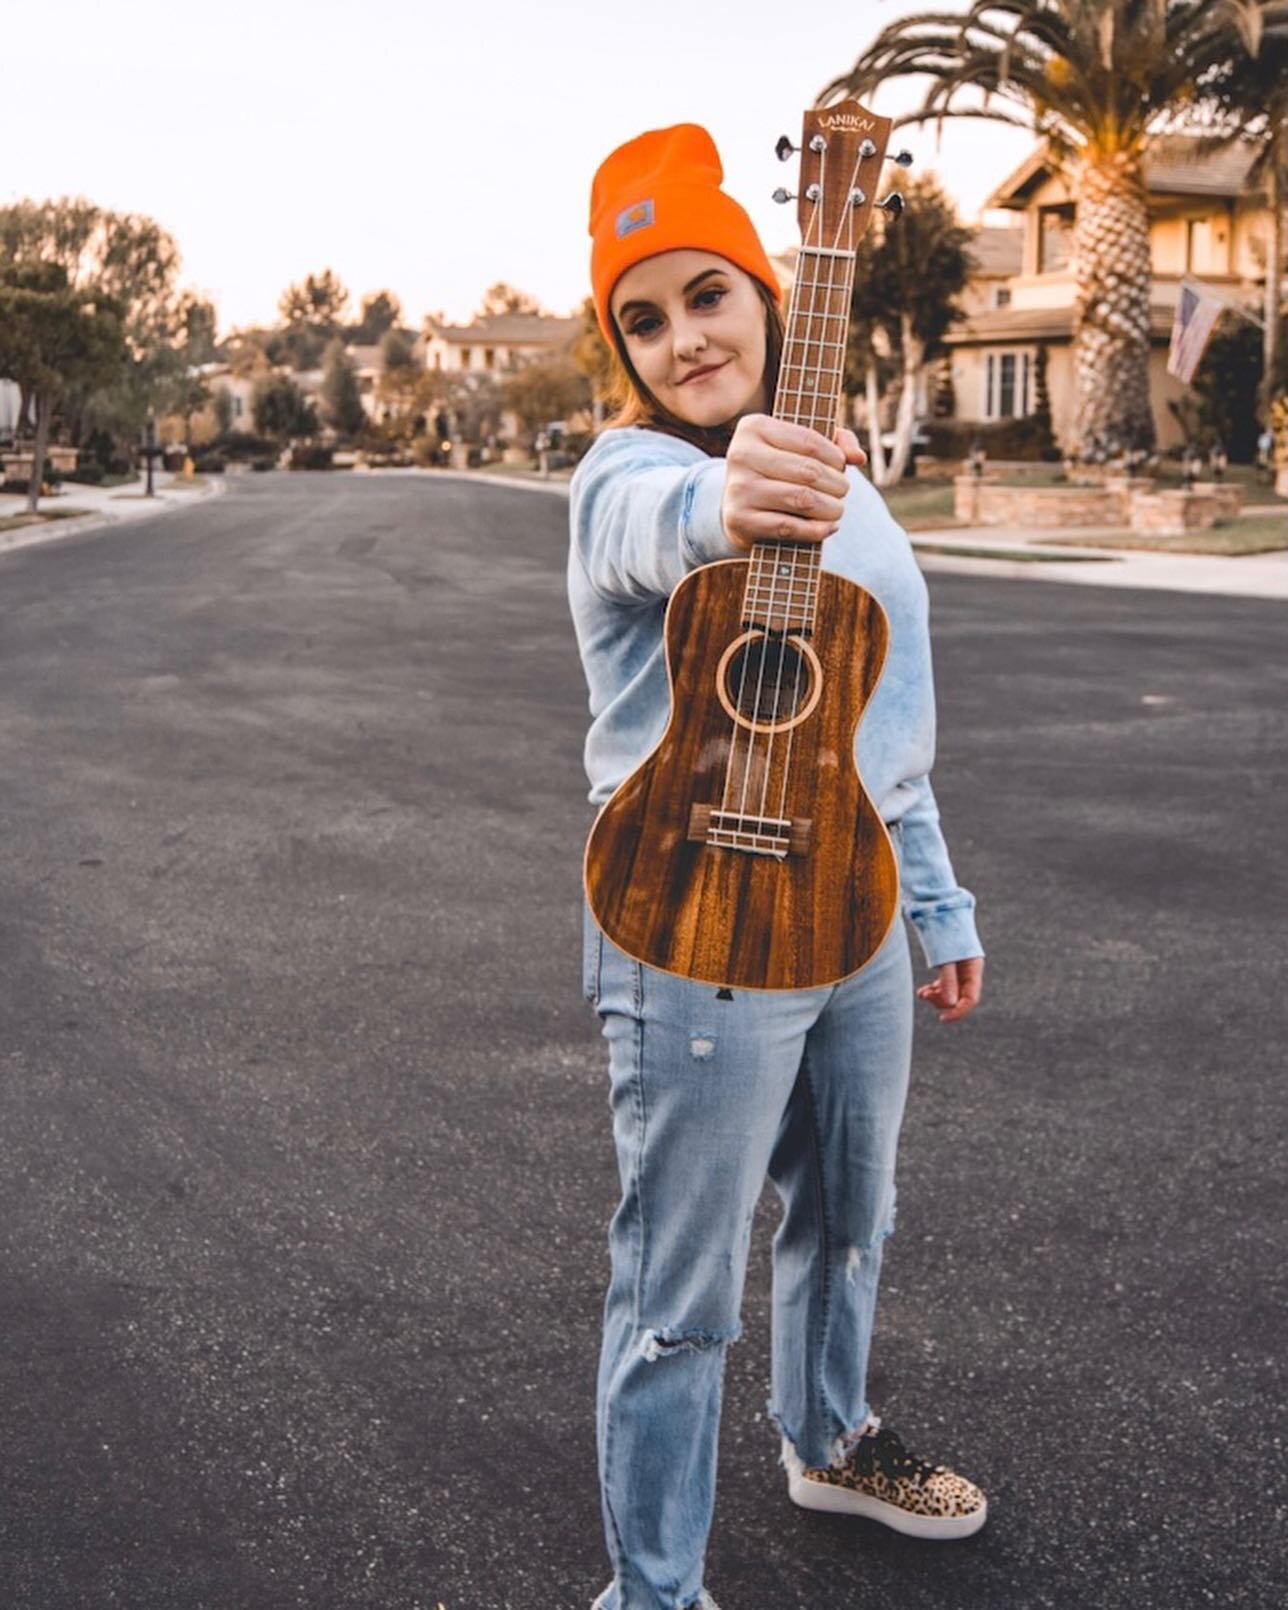 Sharing one more pic of this baddie ukulele because we&rsquo;re going to be 👏 PERFORMING LIVE 👏 next week!! 🎶 Woohoo!! 🥳

Join @tikitrail on @zoom for #TikiTrailLive, a live music and mixology event on Tuesday, February 9th, at 6pm.🌴 I&rsquo;ll 